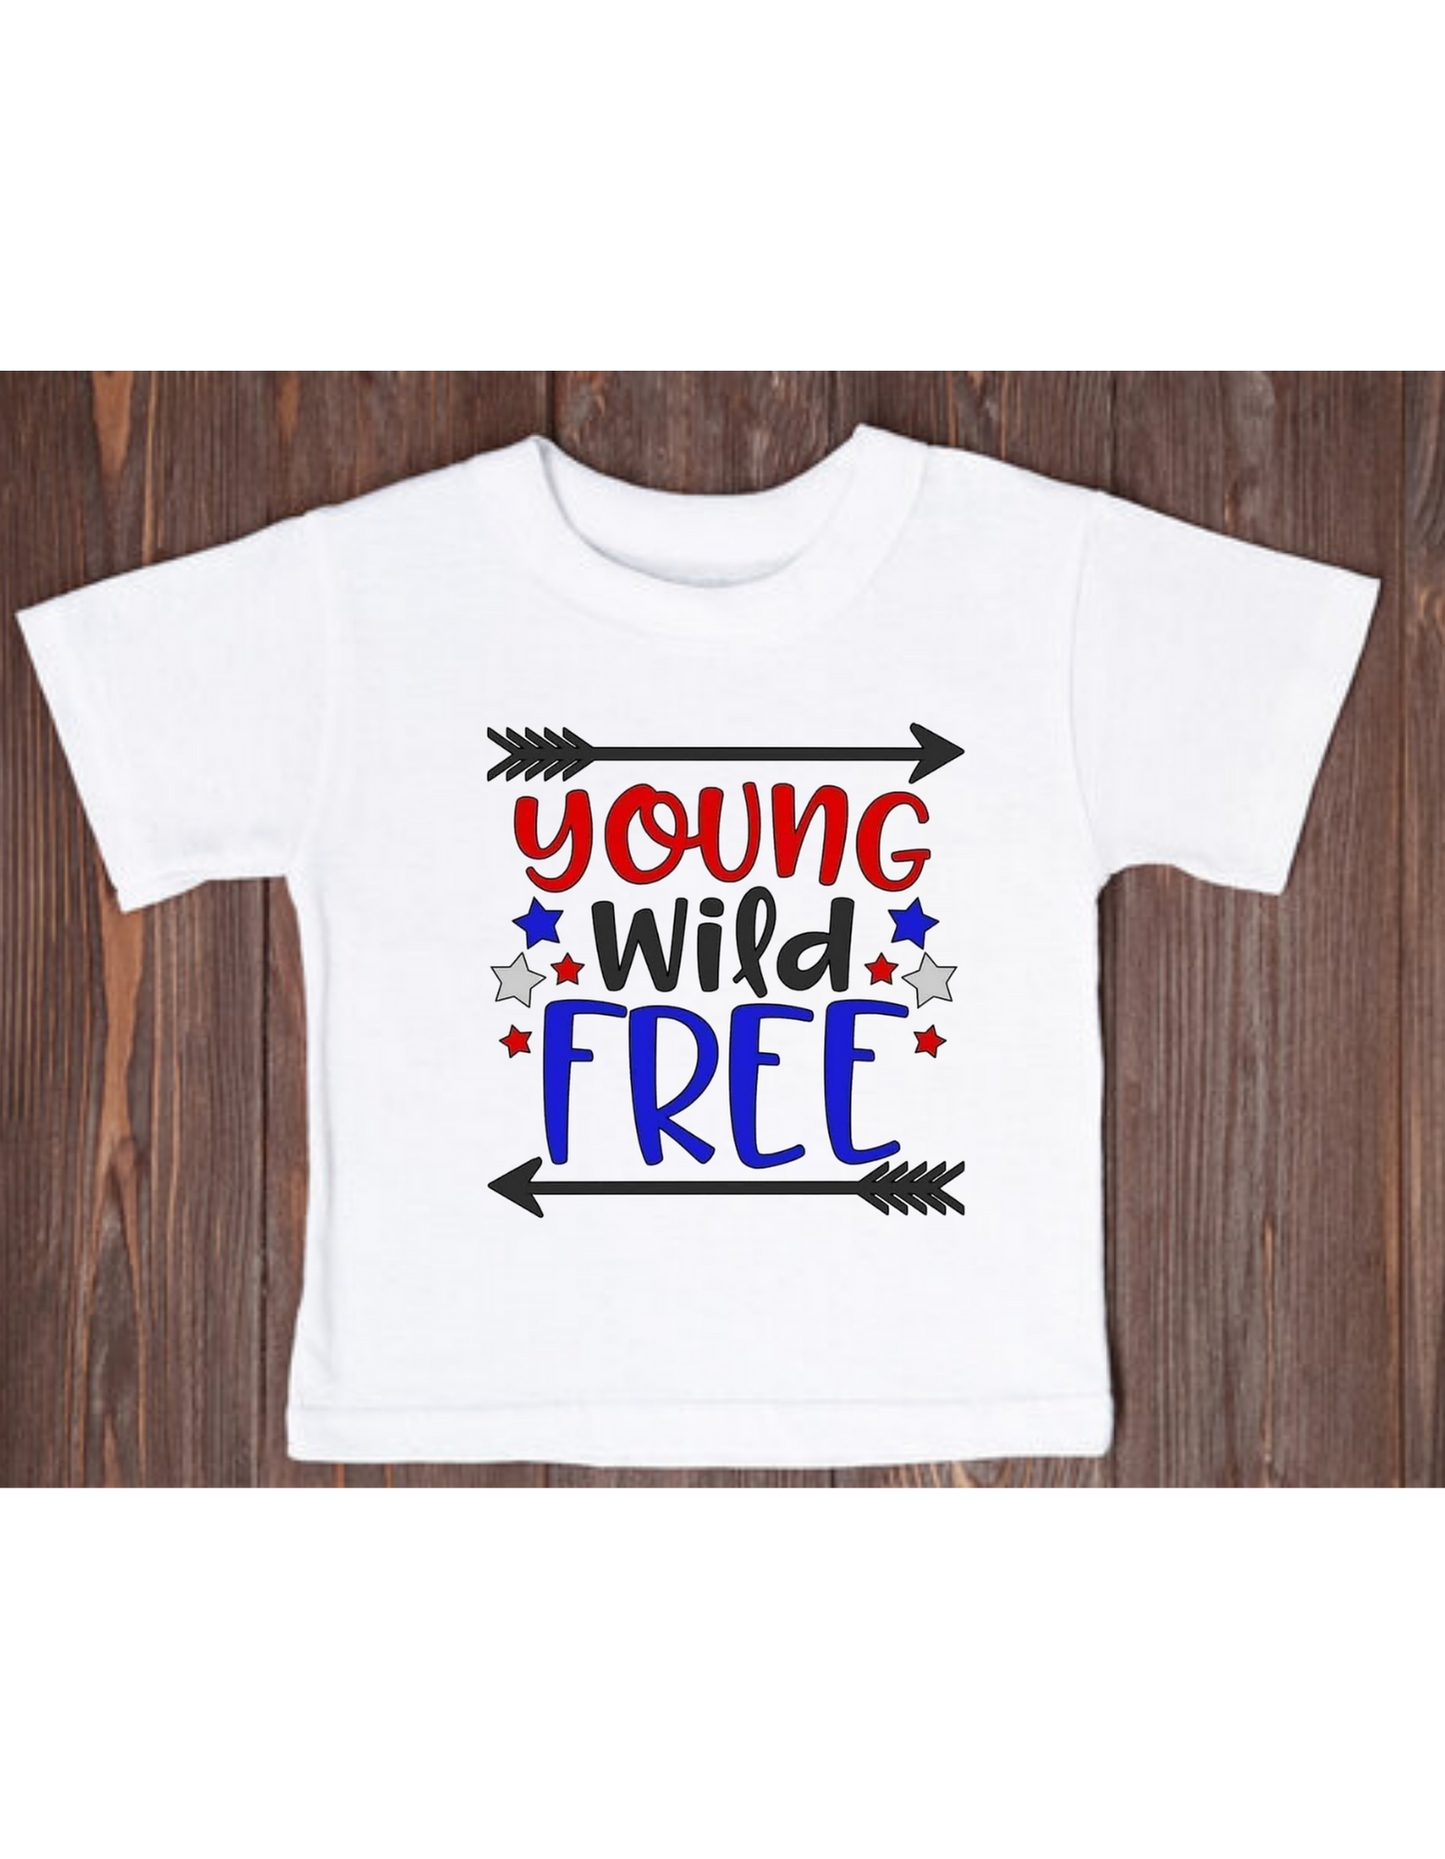 "YOUNG WILD FREE" KIDS SUBLIMATION TEE